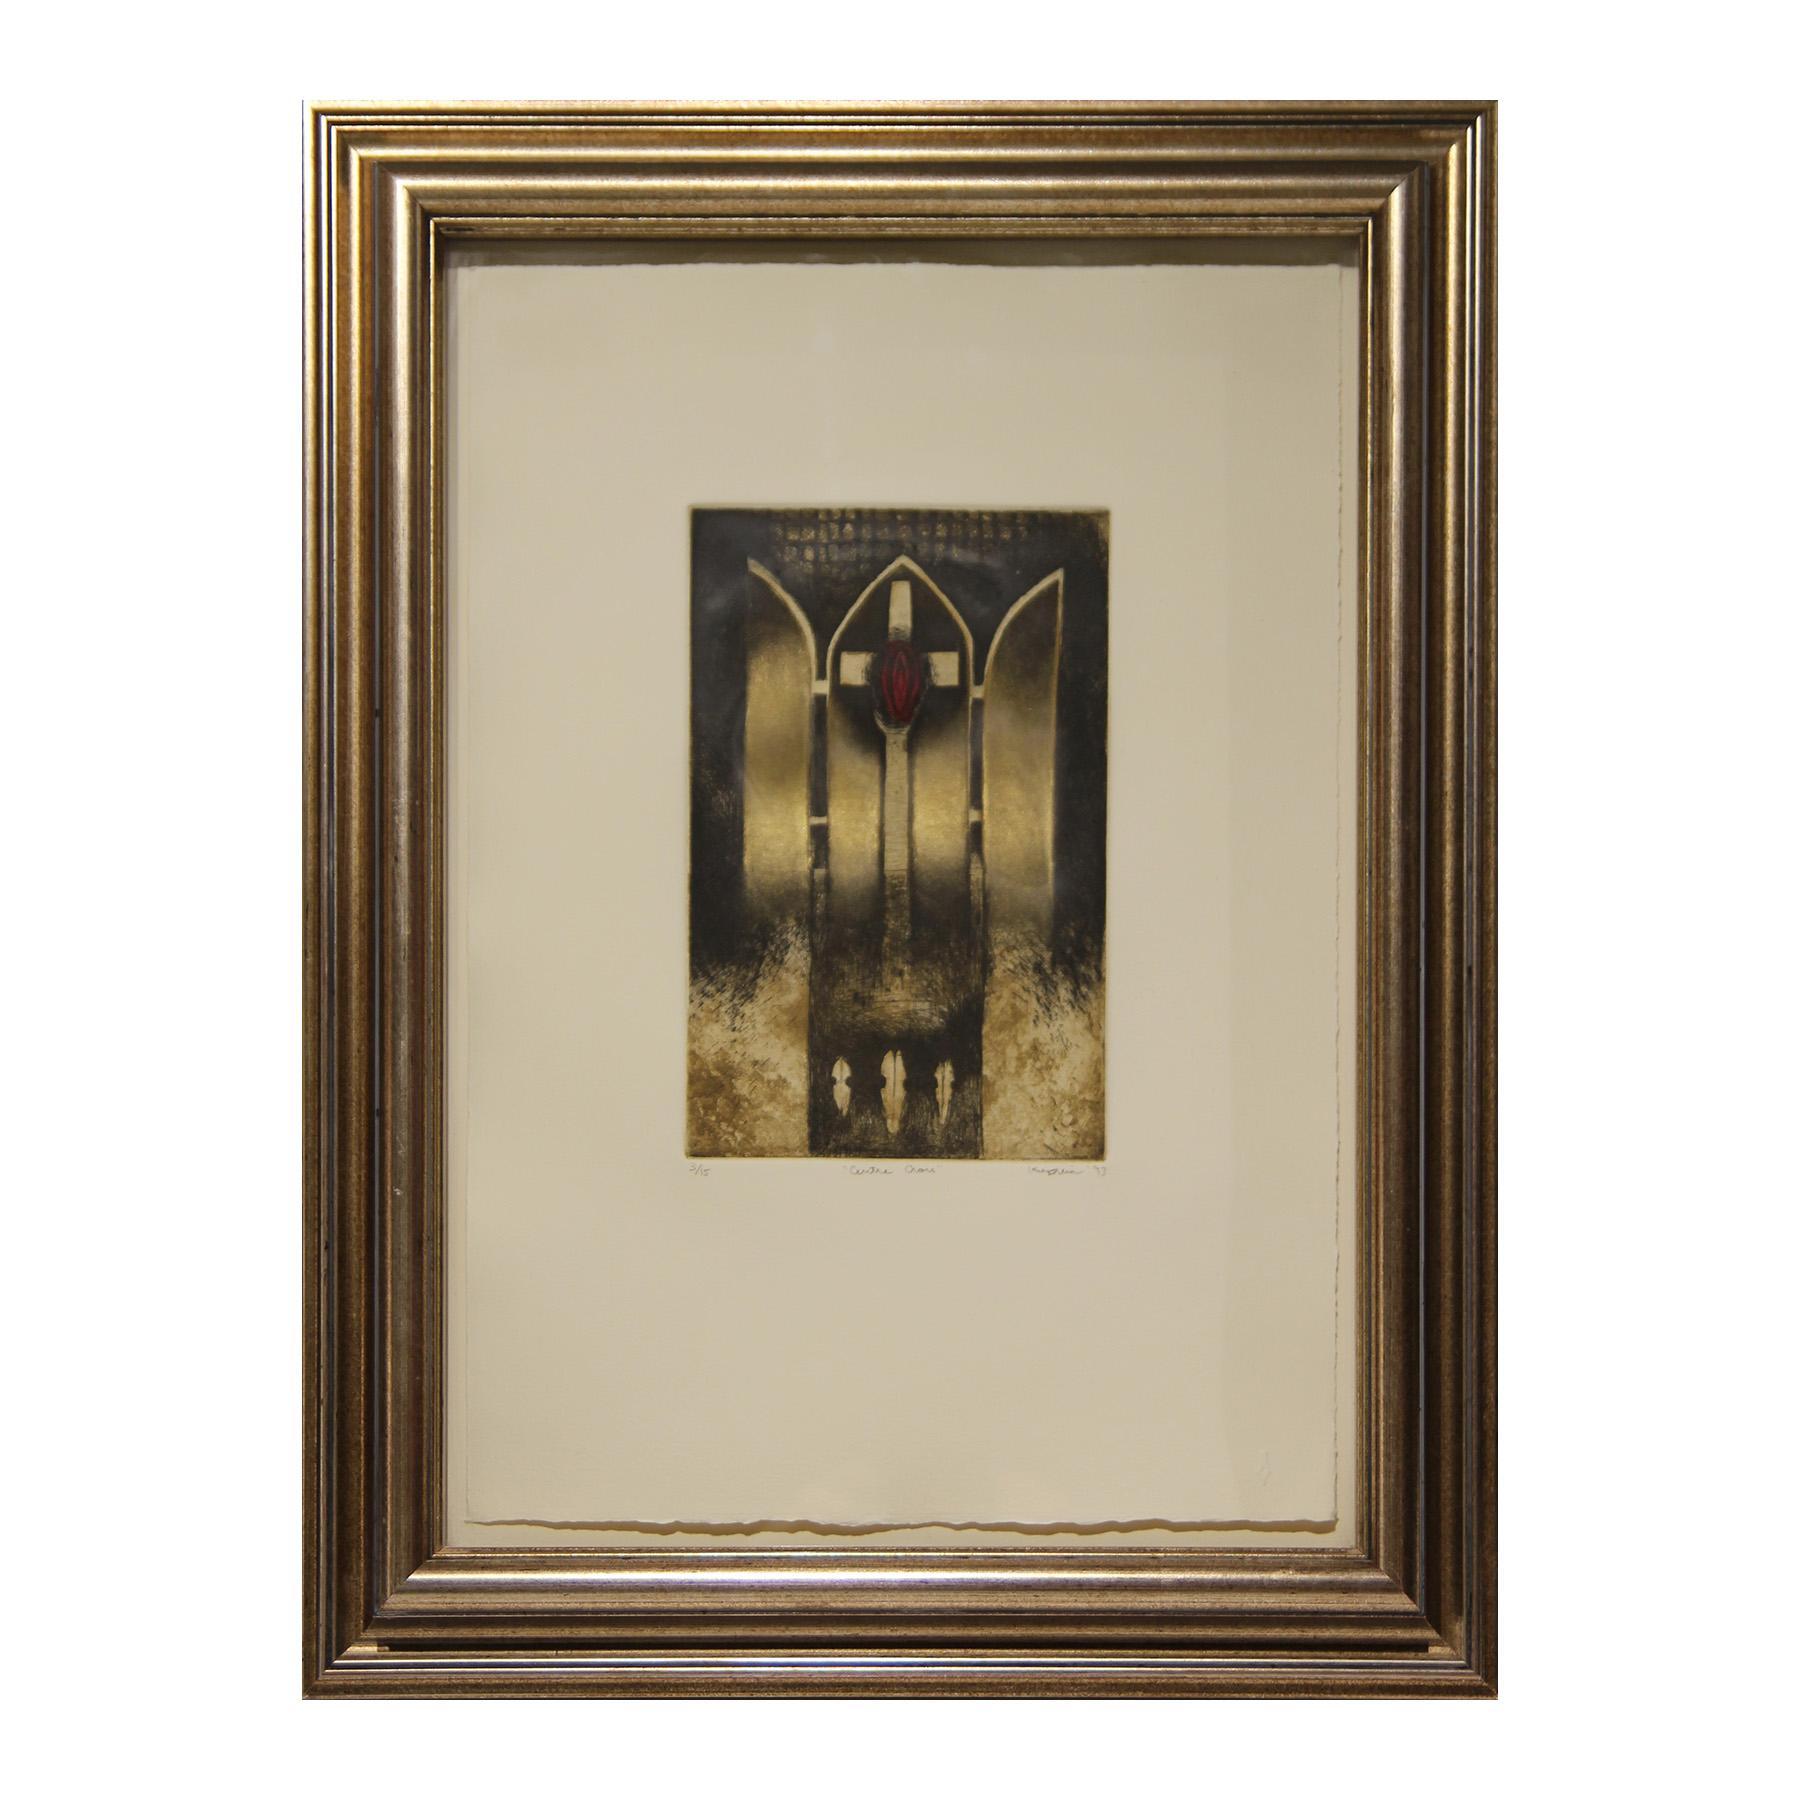 Sharon Kopriva Abstract Print - “Centre Cross” Abstract Black, Red, and Metallic Religious Etching